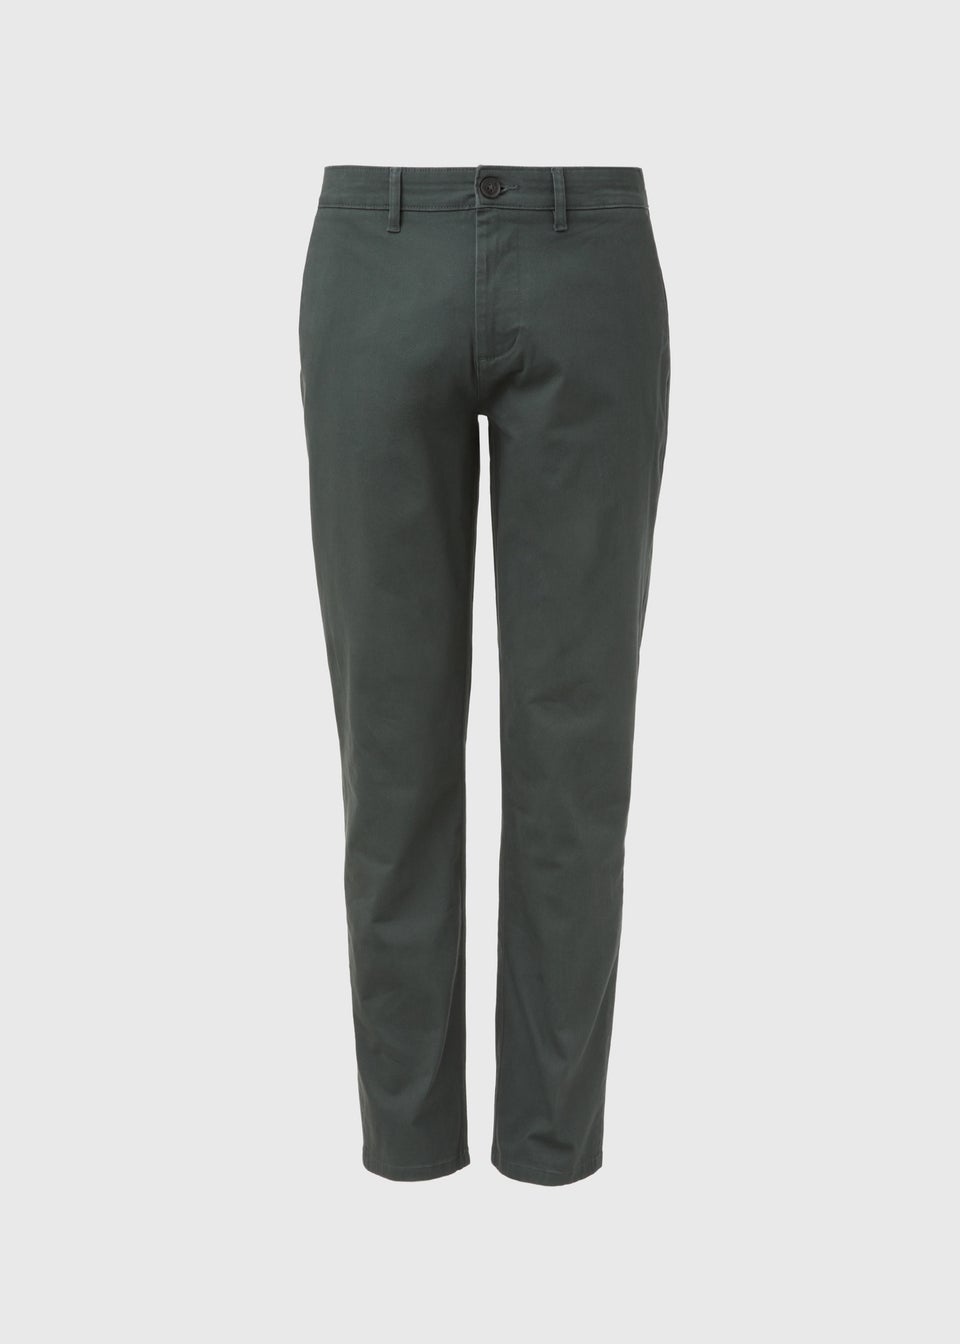 Teal Straight Fit Stretch Chinos